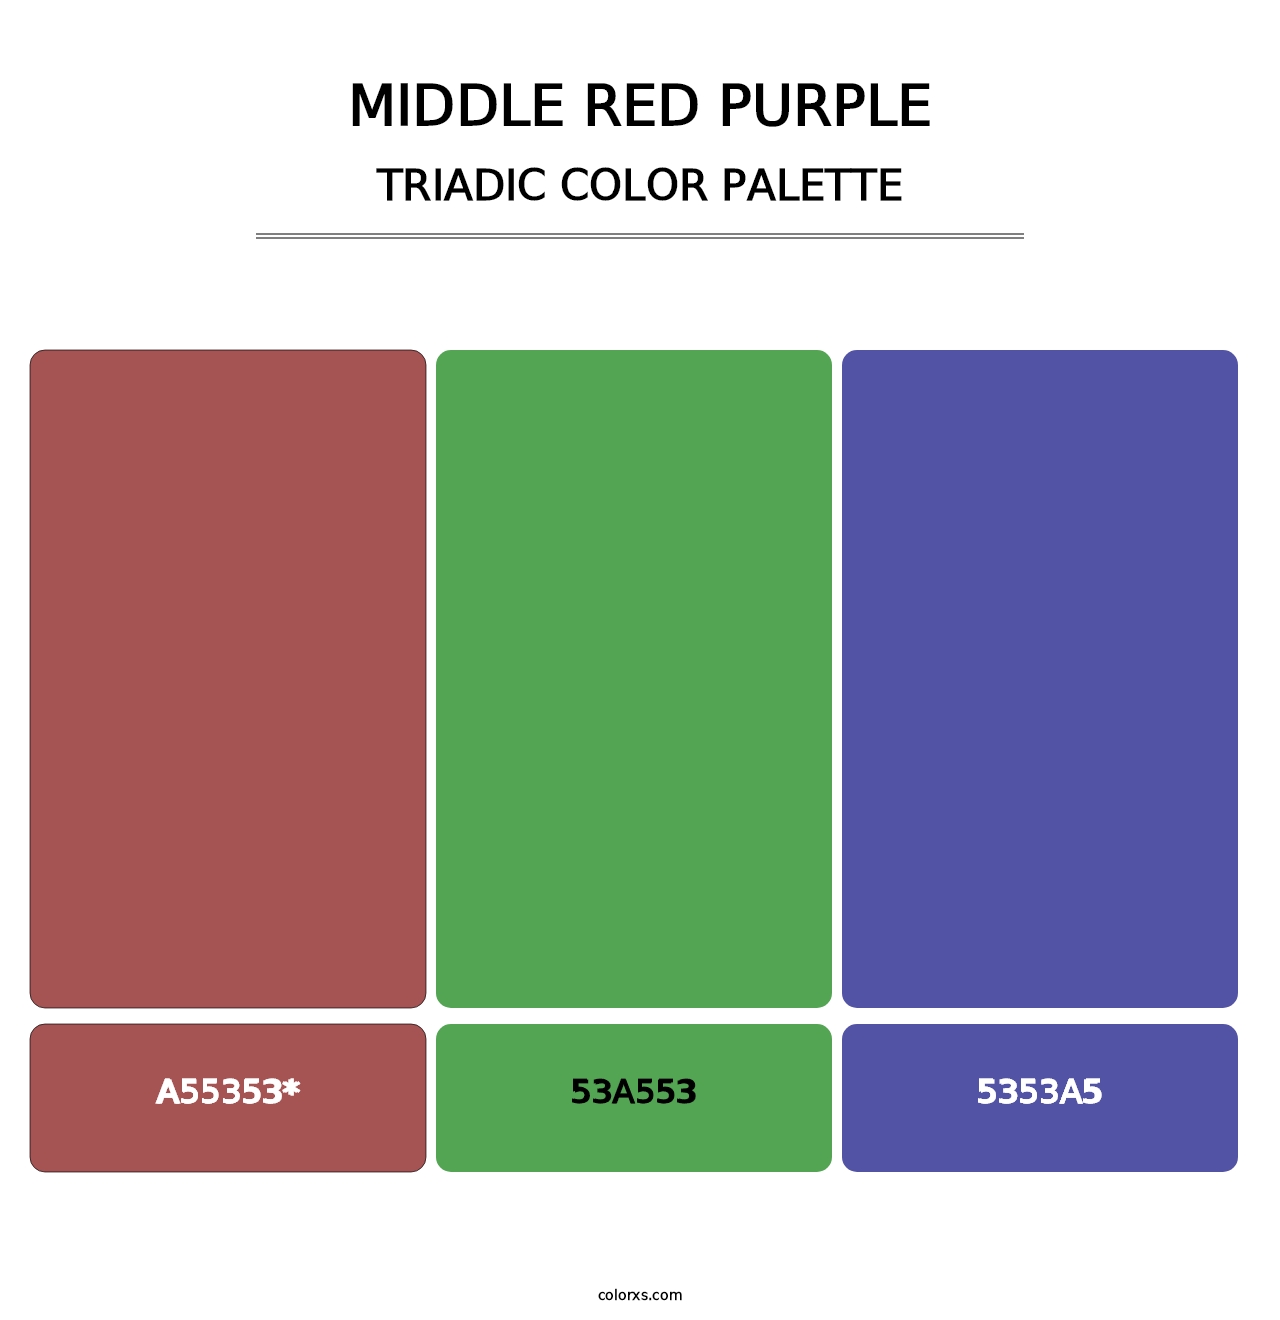 Middle Red Purple - Triadic Color Palette